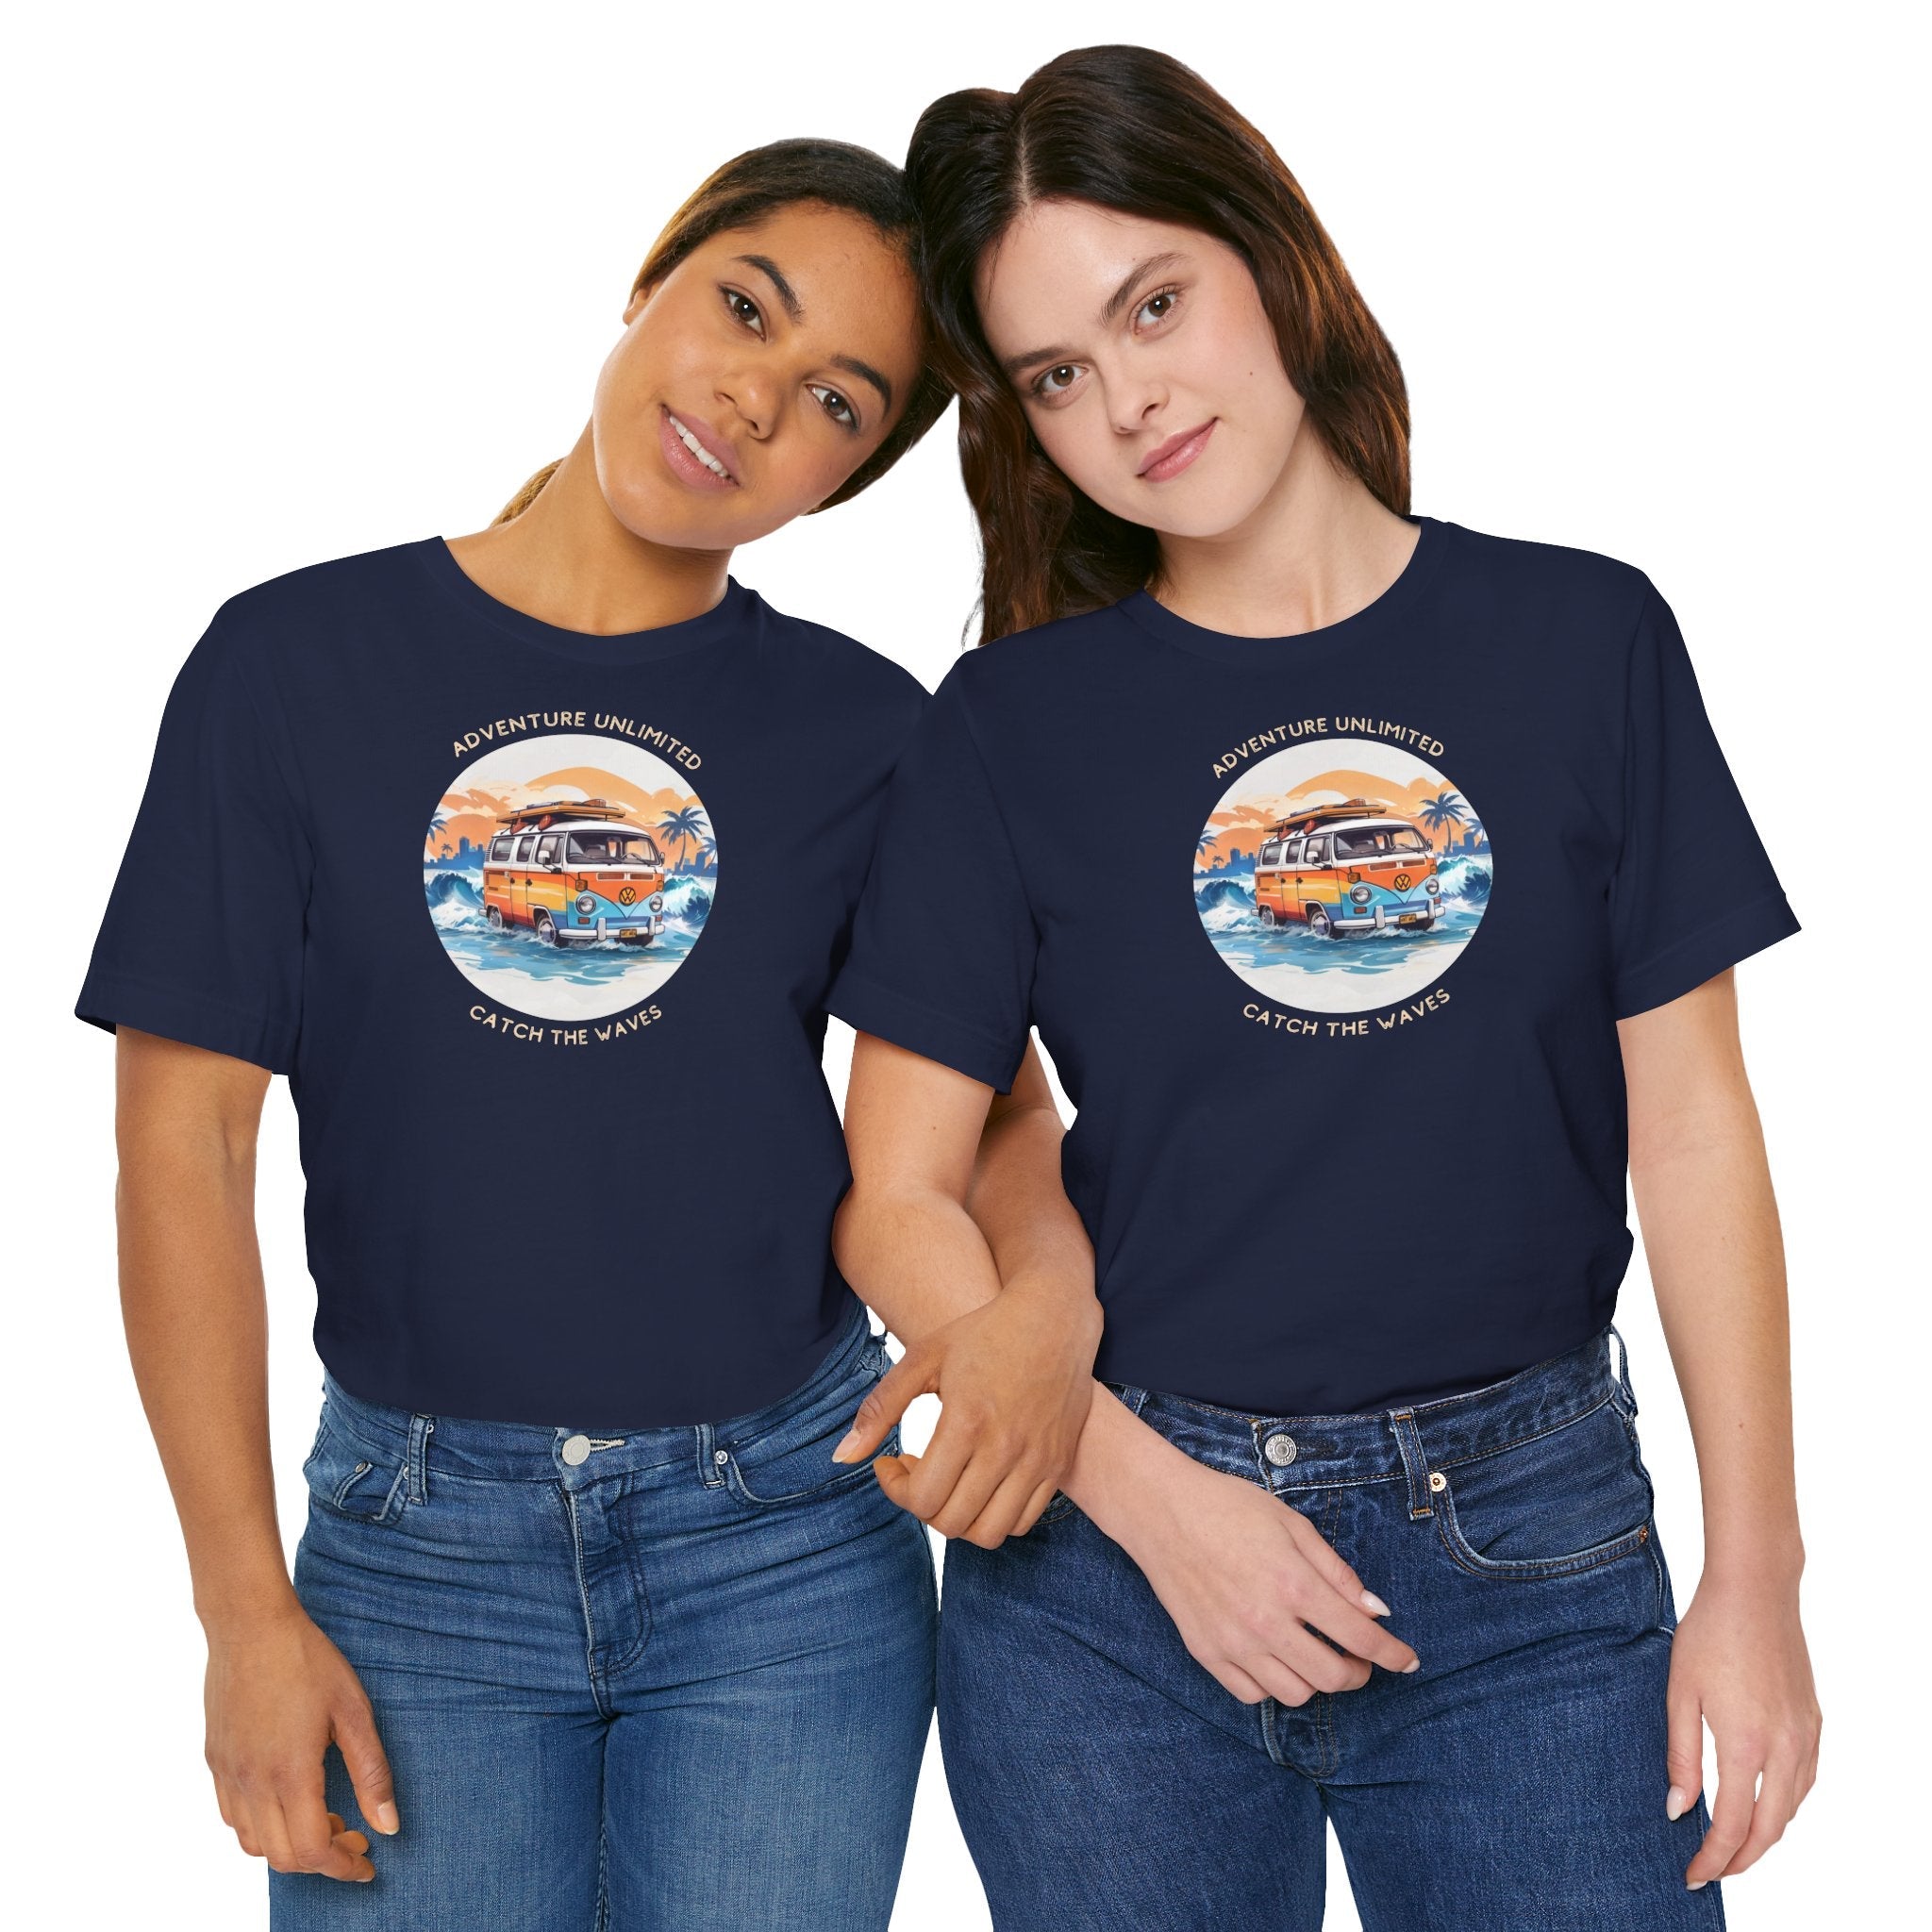 Adventure Unlimited Surfing T-Shirt featuring two women in navy tees with ’the best day’ slogan. EU, Bella & Canvas, direct-to-garment printed